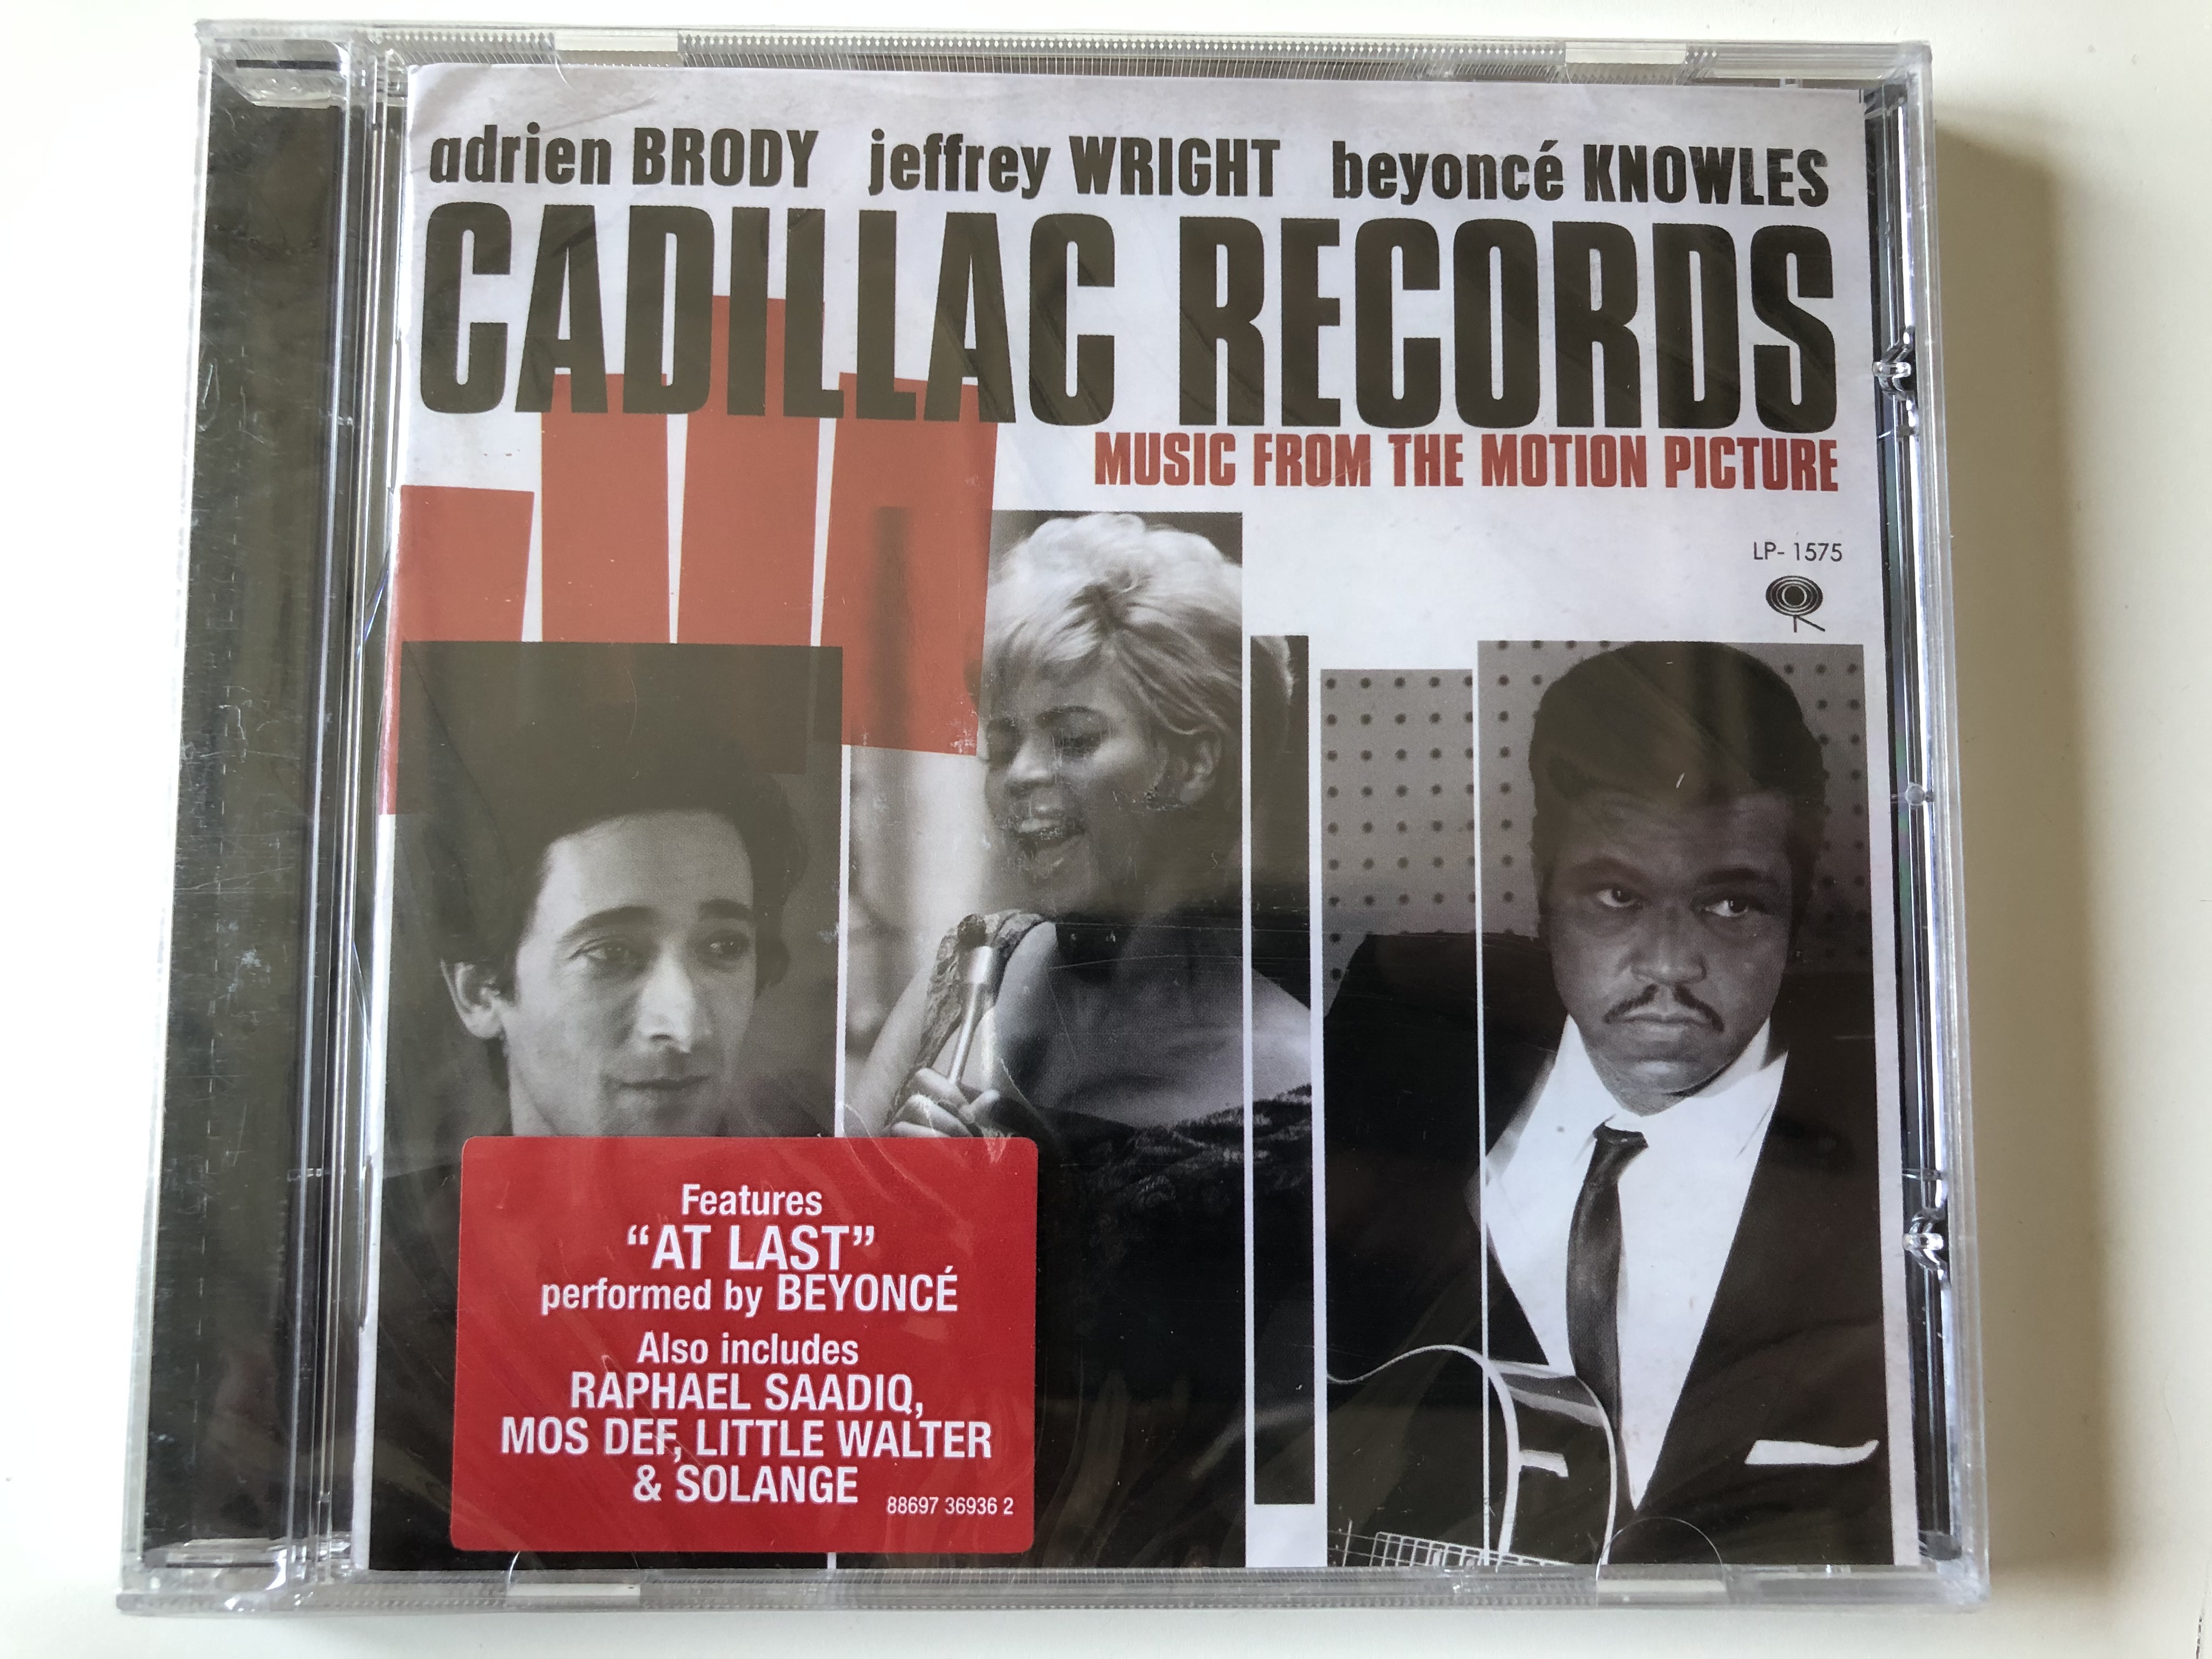 adrien-brody-jeffrey-wright-beyonce-knowles-cadillac-records-music-from-the-motion-picture-featuring-at-last-perfordmed-by-beyonce-also-includes-raphael-saadiq-mos-def-little-walt-1-.jpg